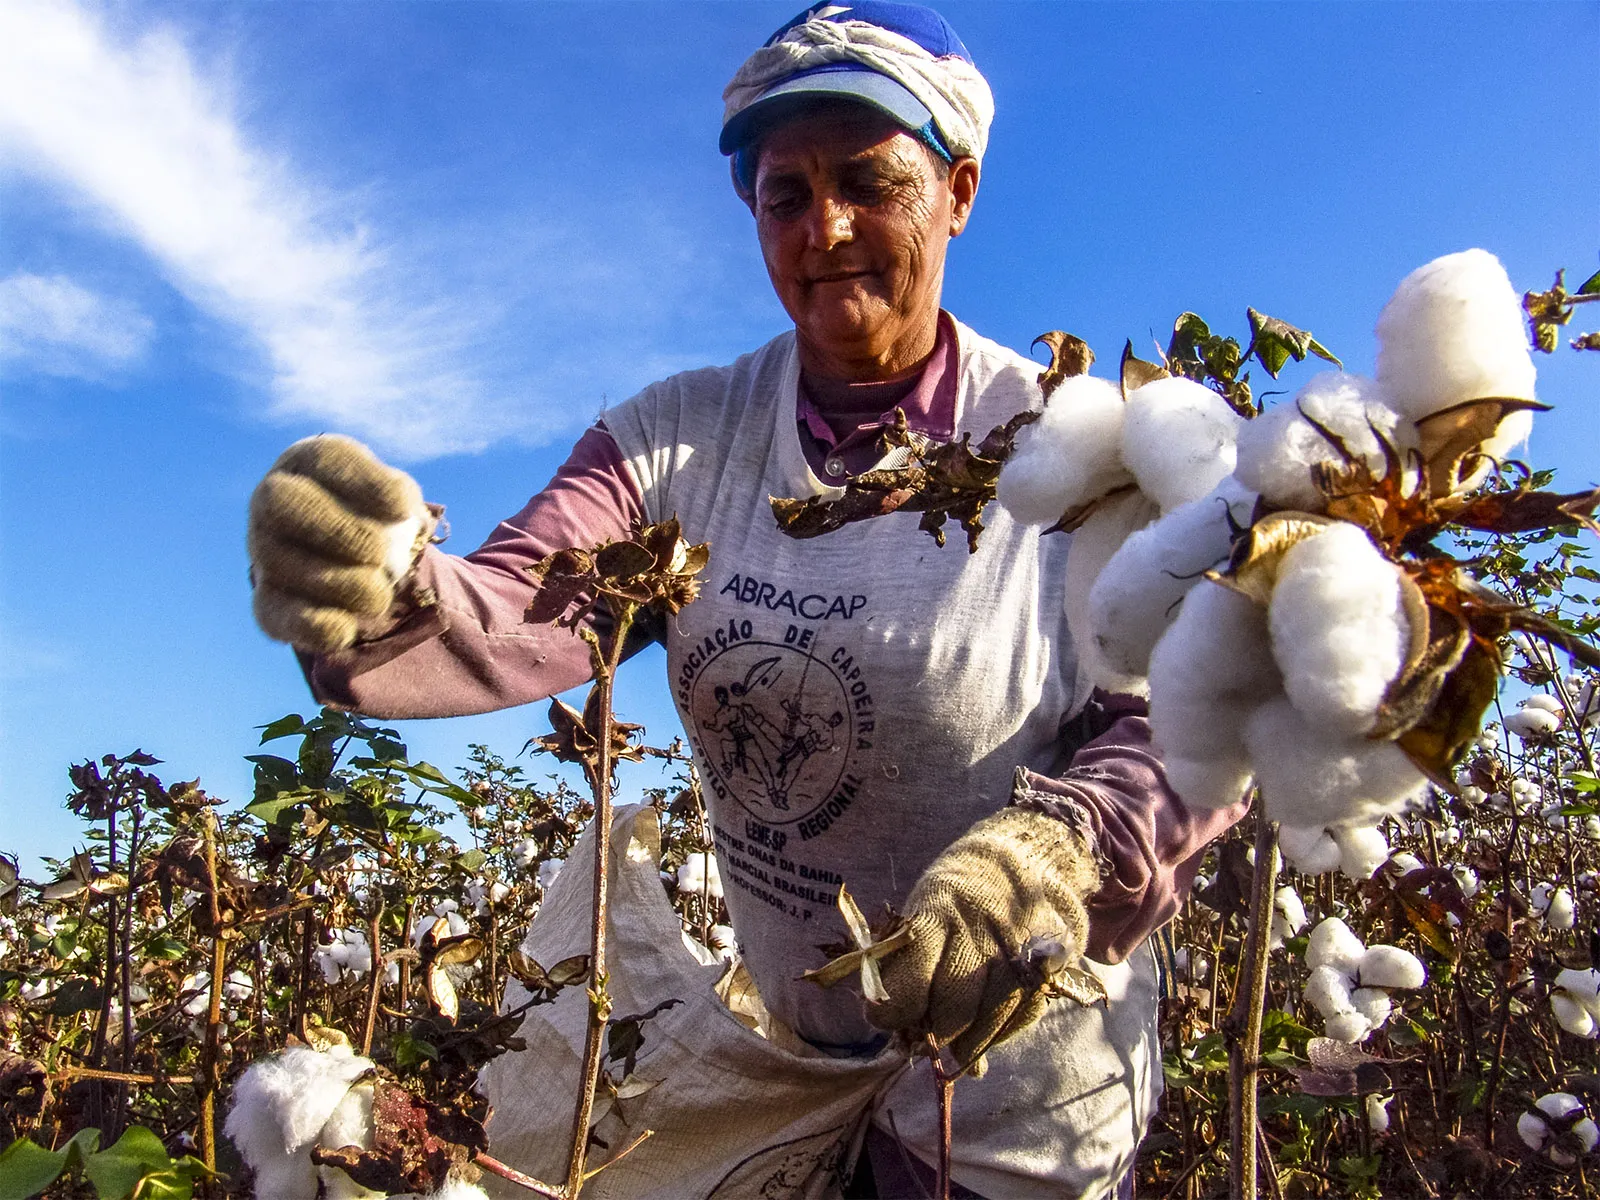 Brazil Nears Cotton Export Lead Amid Global Challenges. (Photo Internet reproduction.)